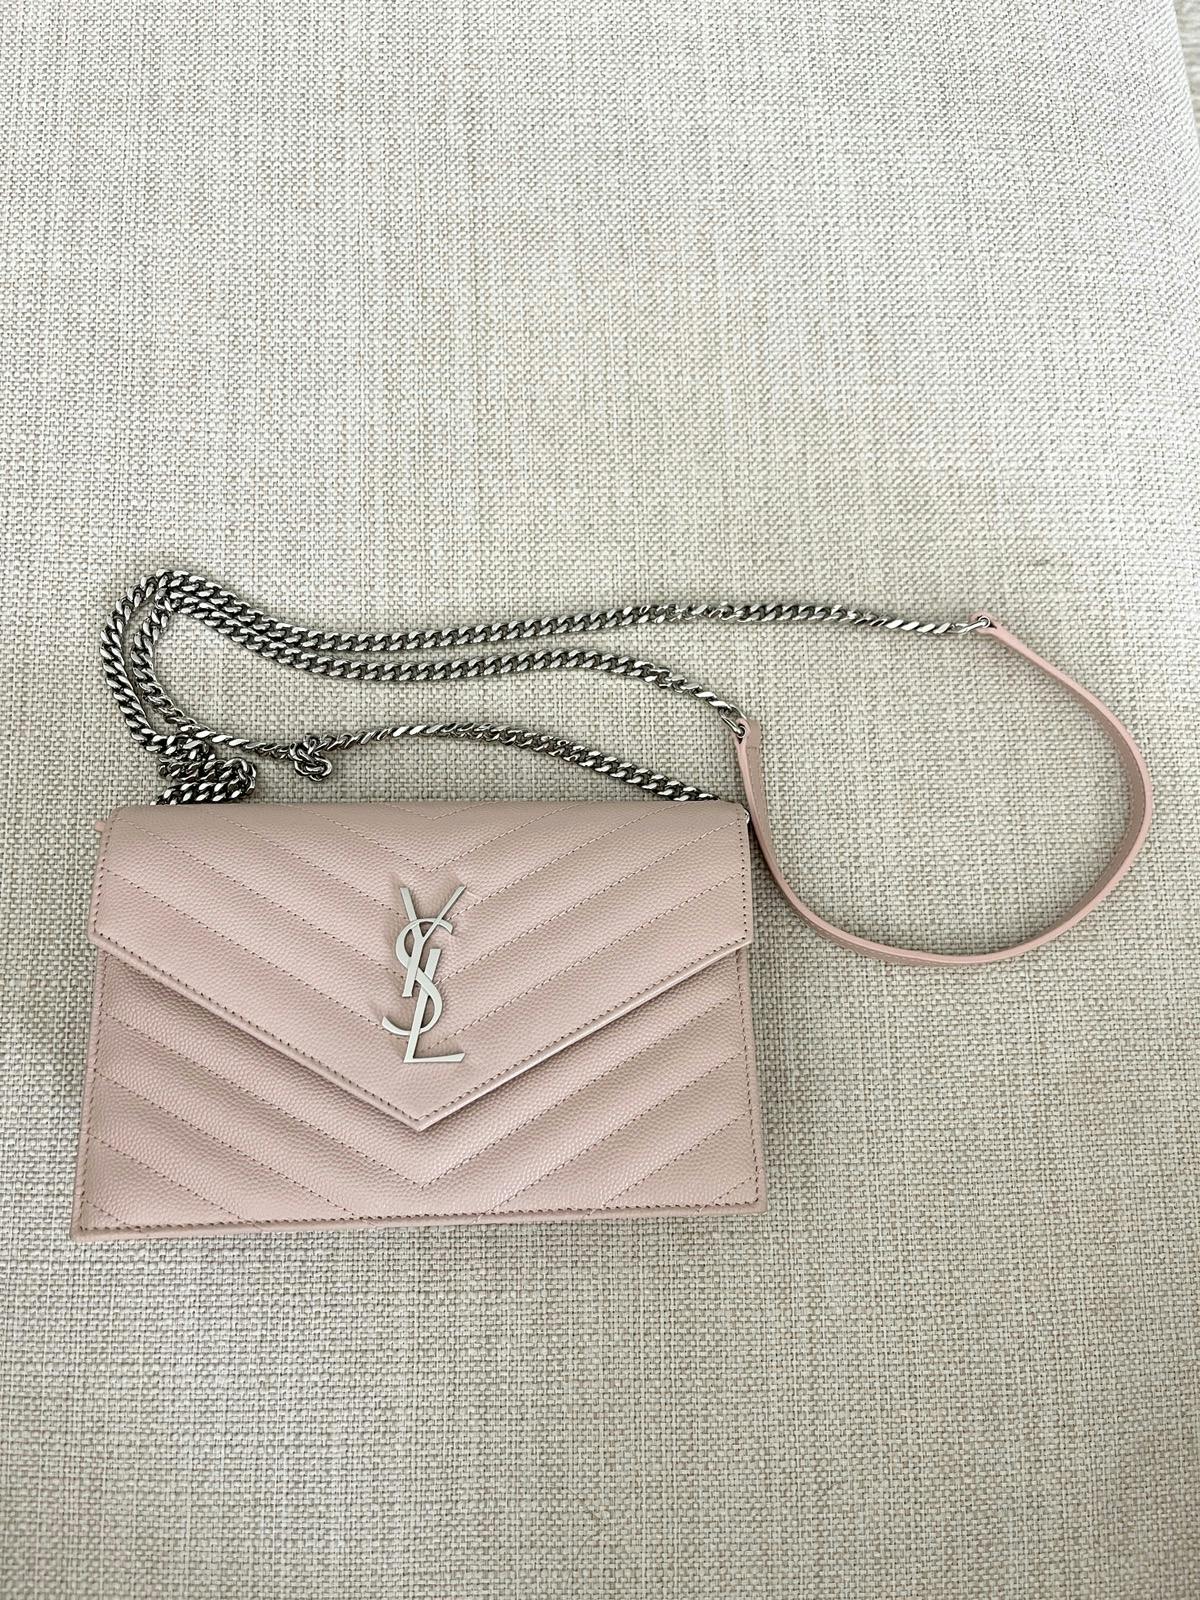 Yves Saint Laurent Bags Ysl Caviar Wallet On Chain In Nude - 2